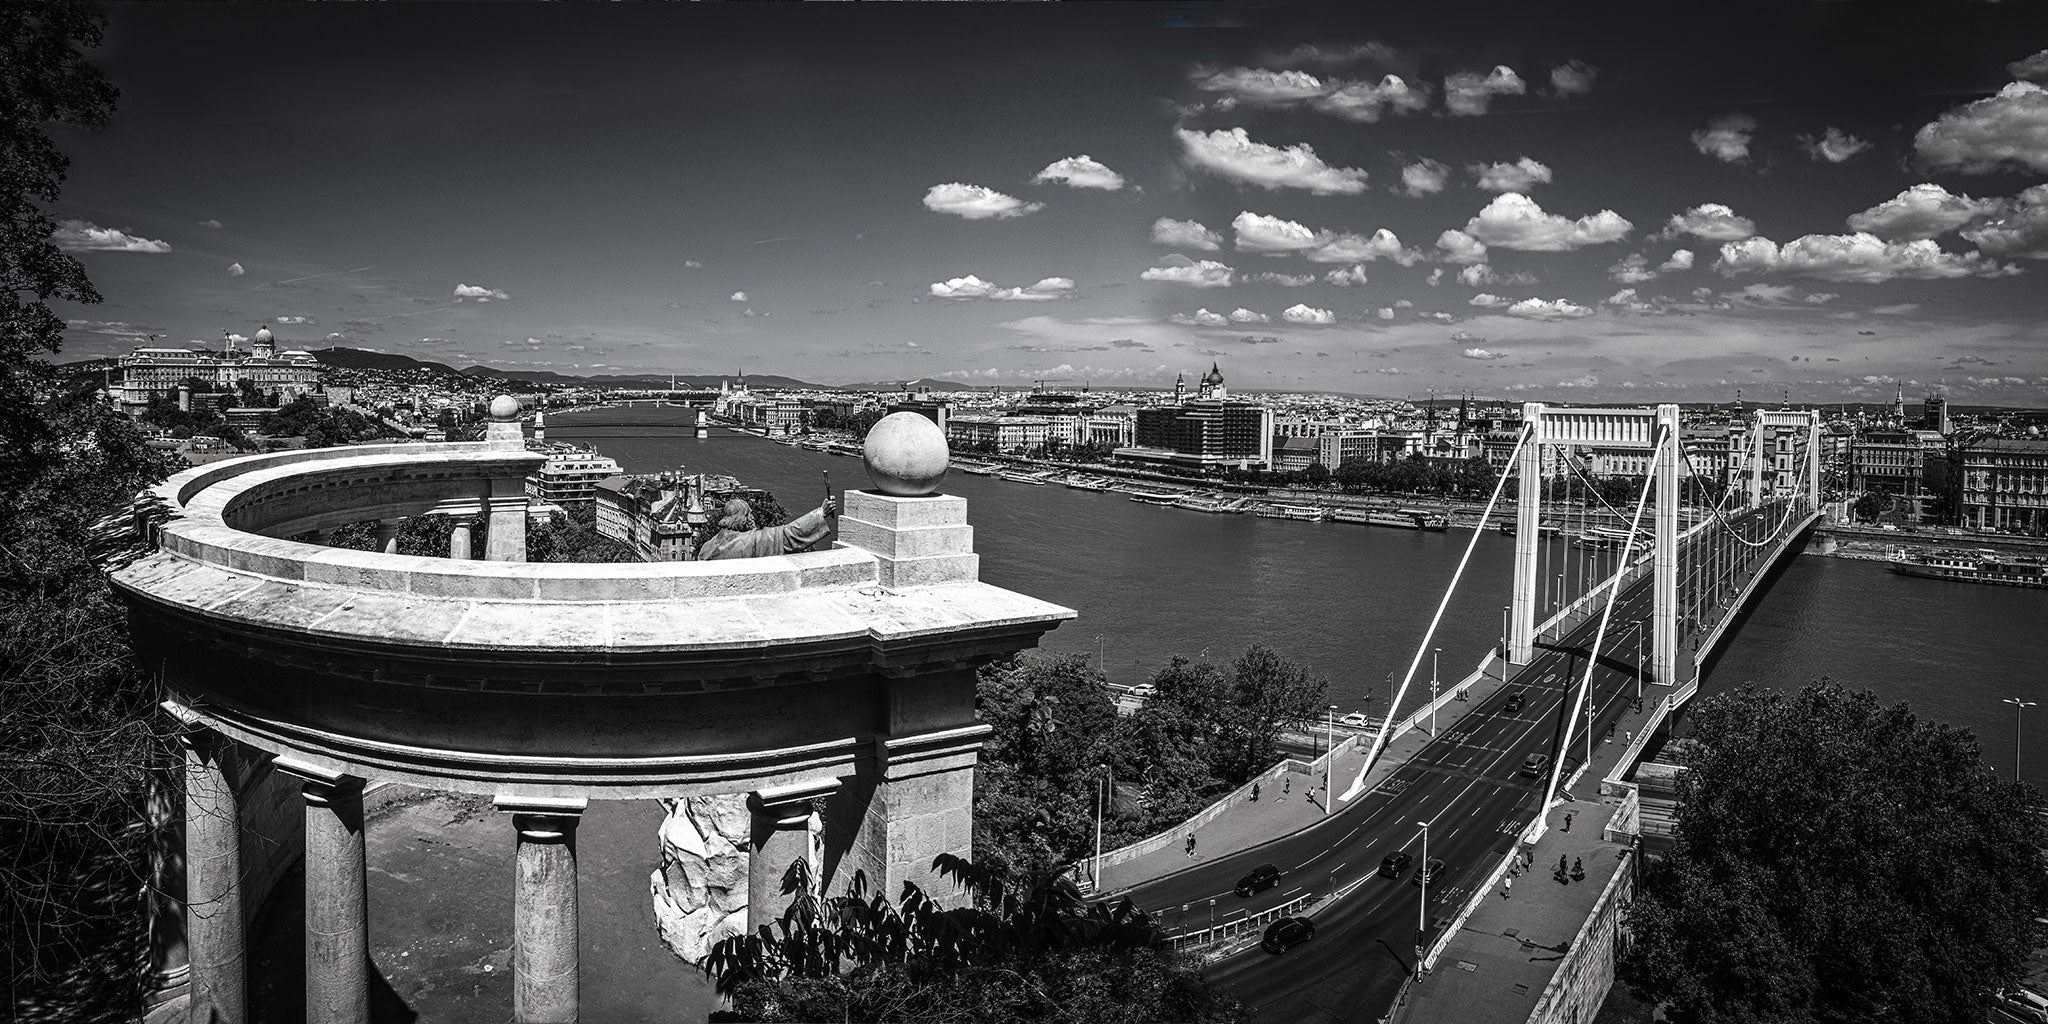 BUDAPEST PANORAMA No.5789BW                           "FLYING ON THE ZENITH"